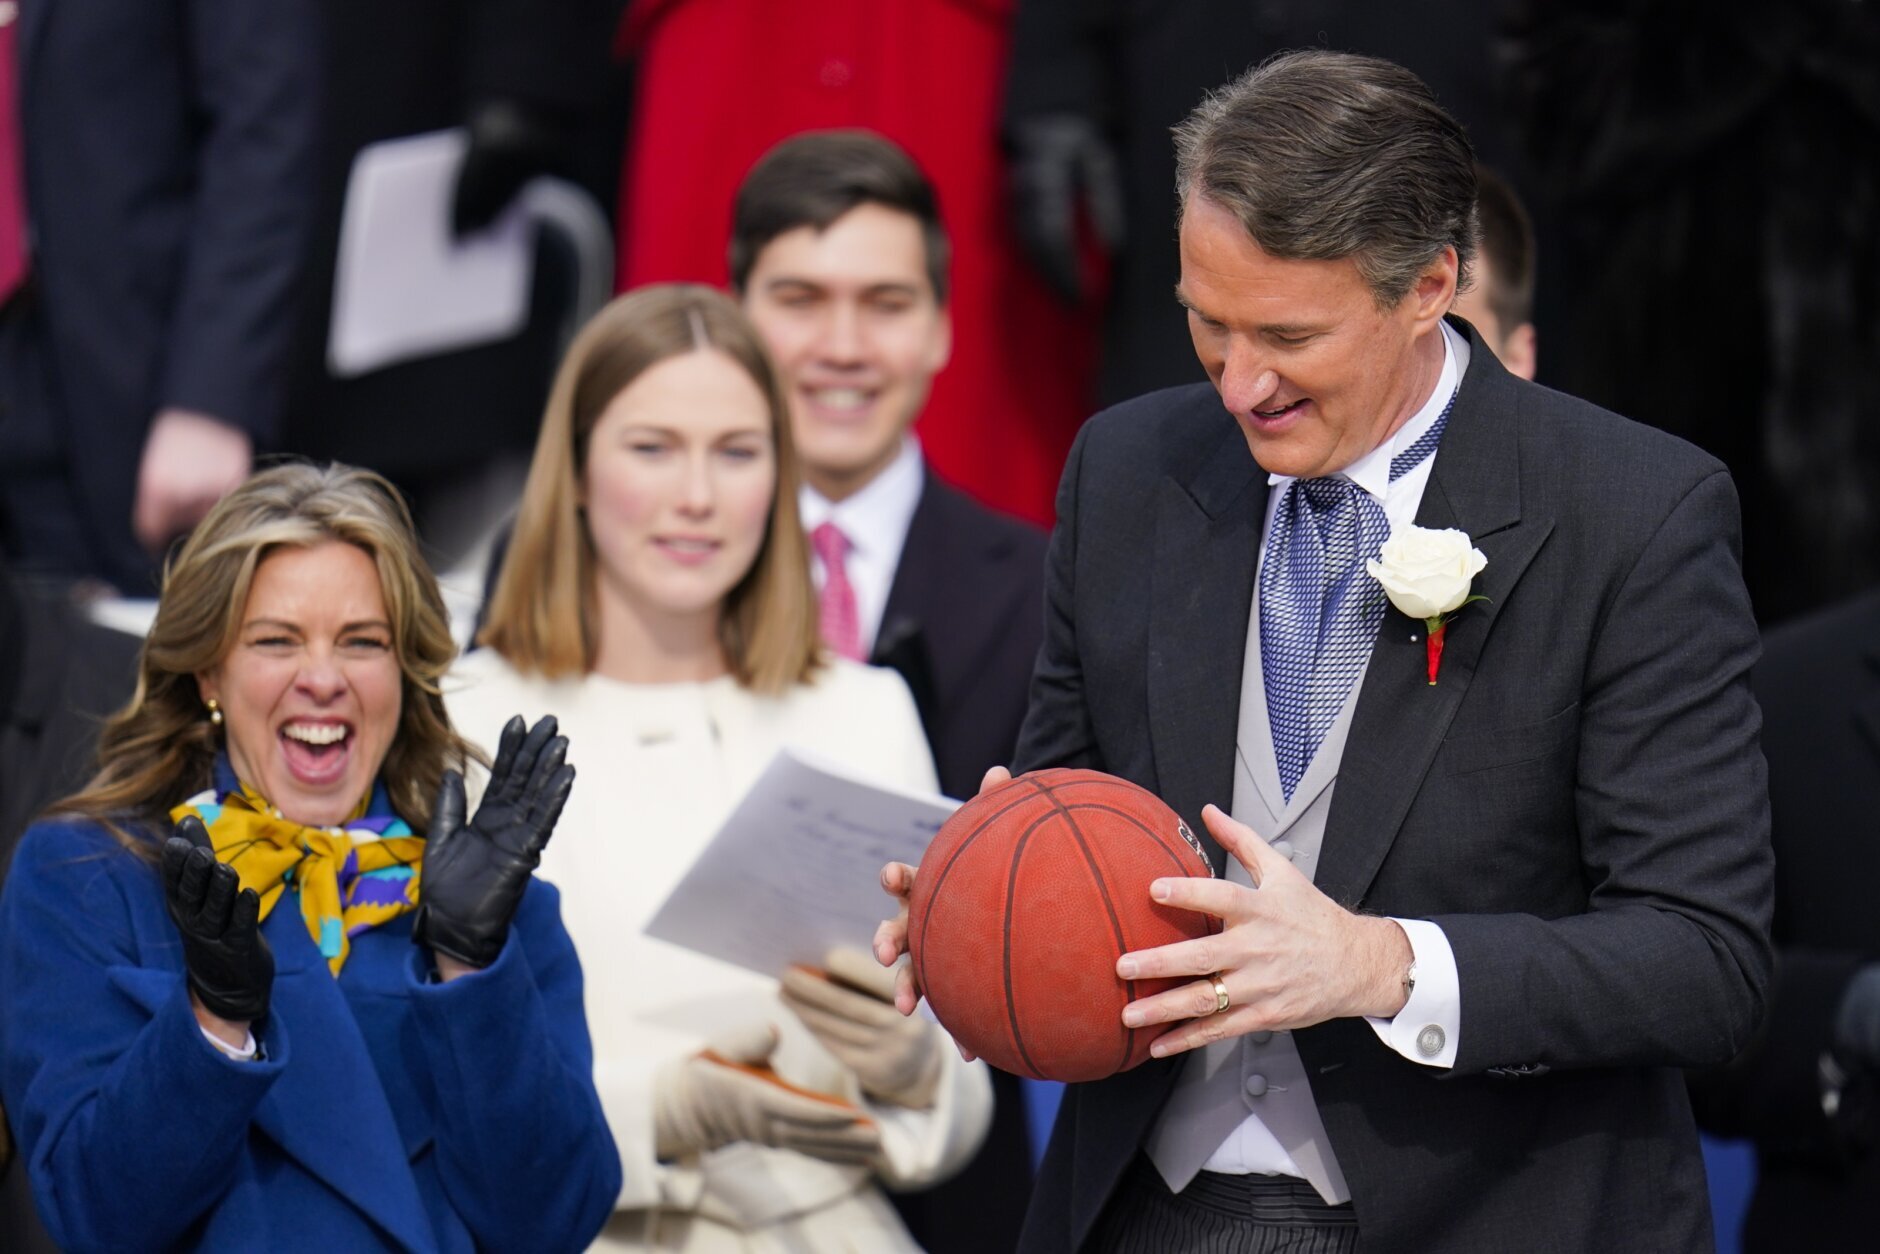 Virginia Gov. Glenn Youngkin holds a basketball tossed to him by the members of Norfolk Academy basketball team during a parade after he was sworn in during the gubernatorial inauguration ceremony, Saturday, Jan. 15, 2022, in Richmond, Va. (AP Photo/Julio Cortez)